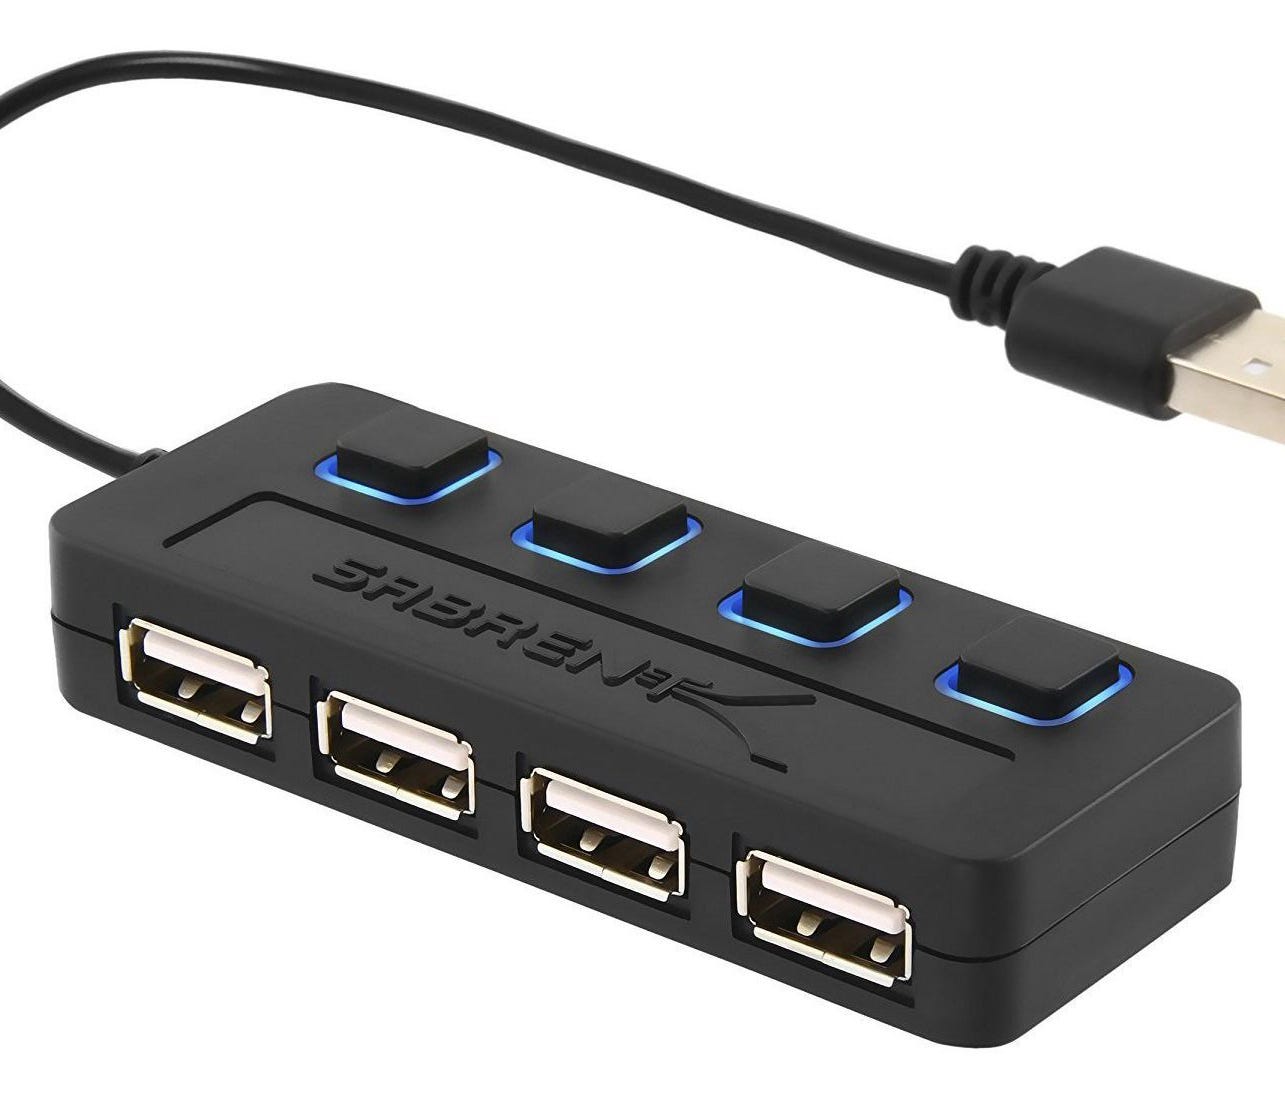 Never run out of USB ports again with this $5 Amazon lightning deal